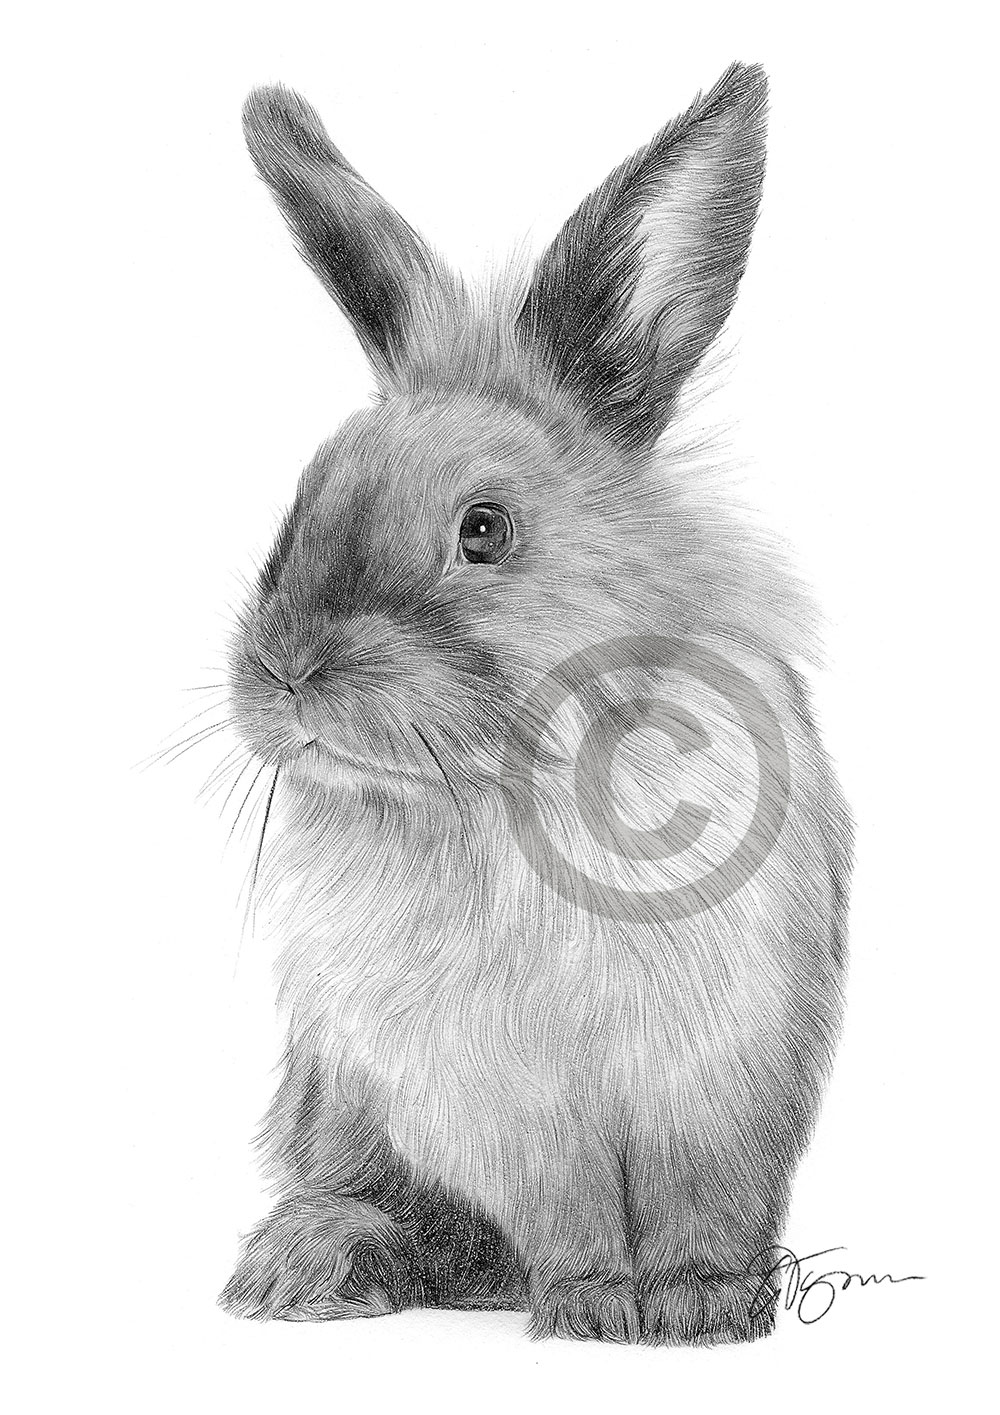 Pencil drawing of a rabbit by artist Gary Tymon